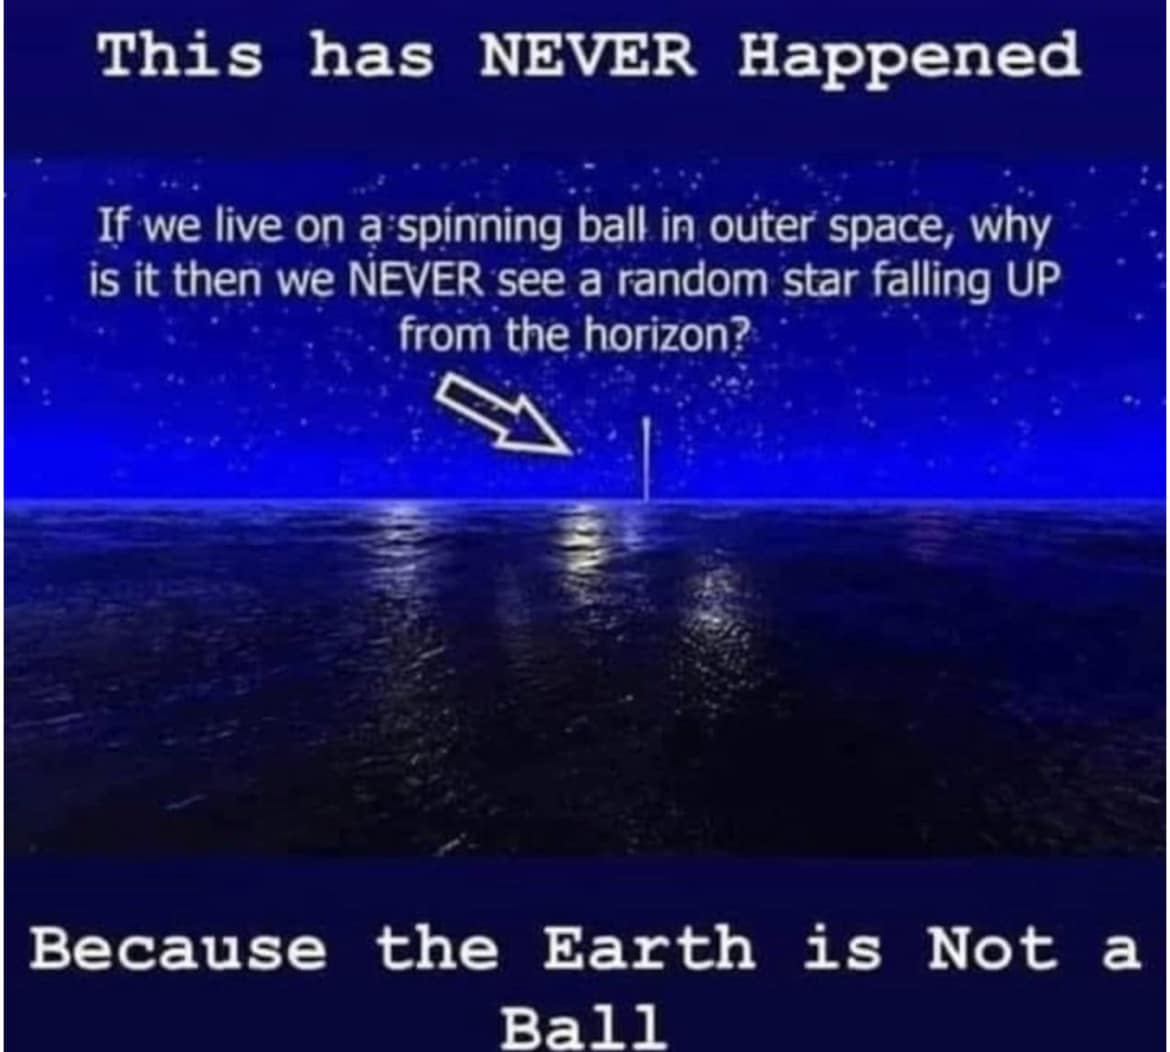 I've never seen it happen. Have you? #FlatEarth #Moonhoax